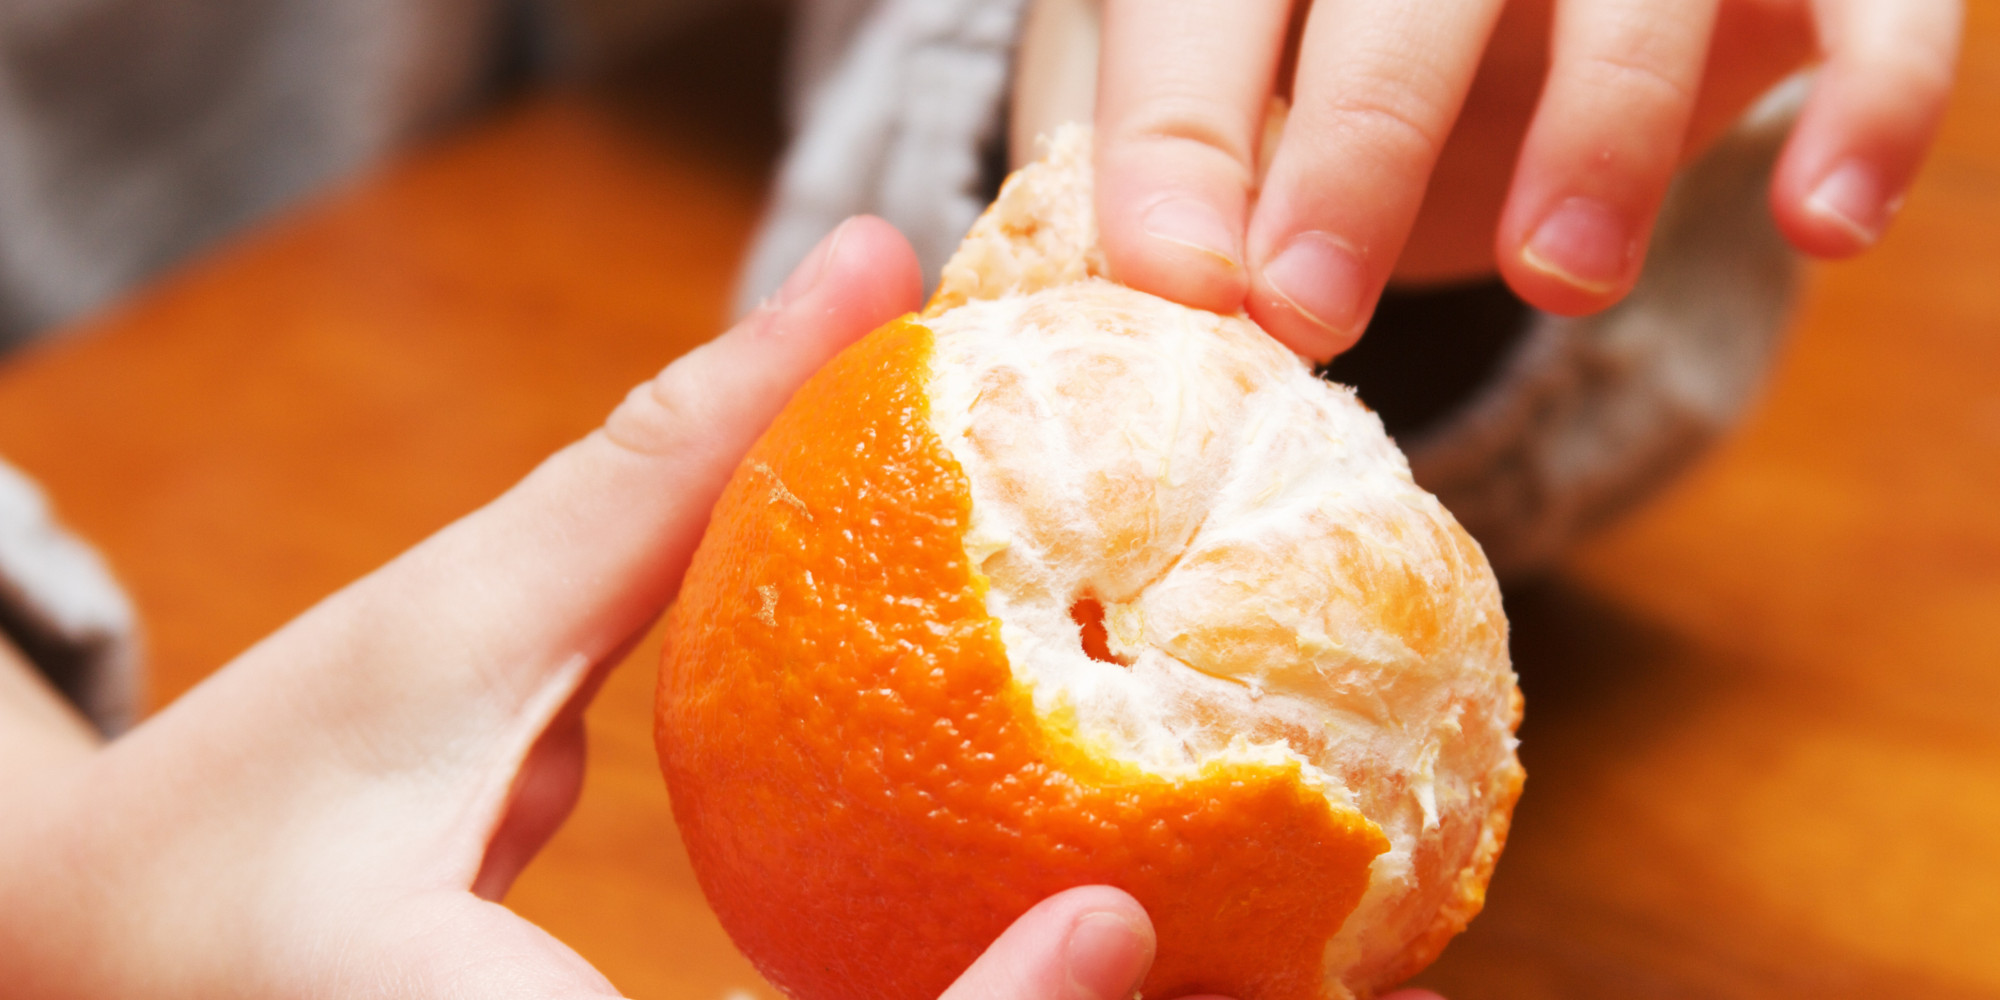 How To Peel An Orange With A Spoon And Make Zero Mess | HuffPost